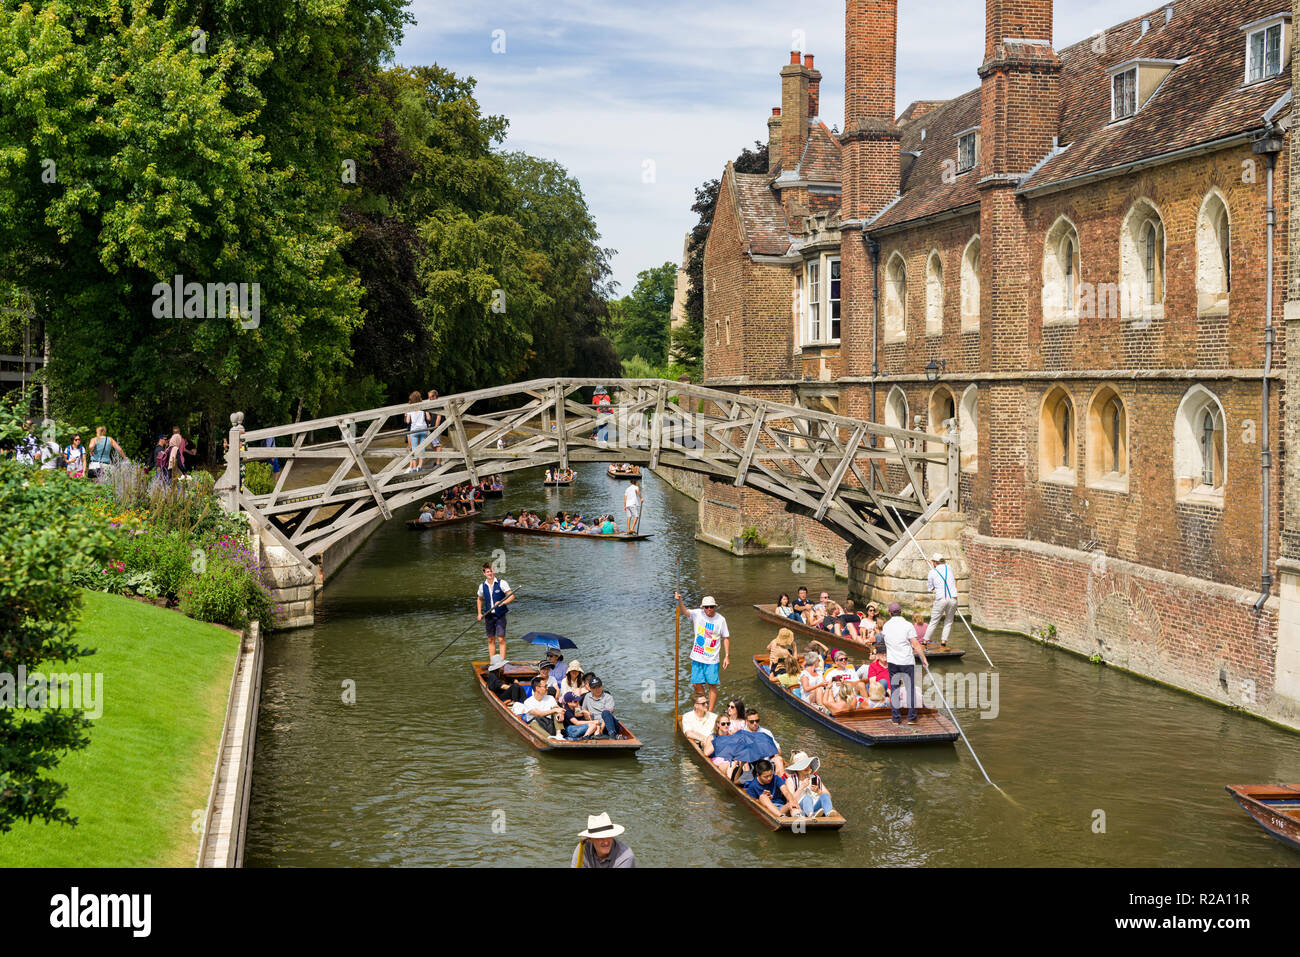 The famous and historic Mathematical wooden bridge with people walking on it as punt boats pass underneath on a sunny Summer day, Cambridge, UK Stock Photo